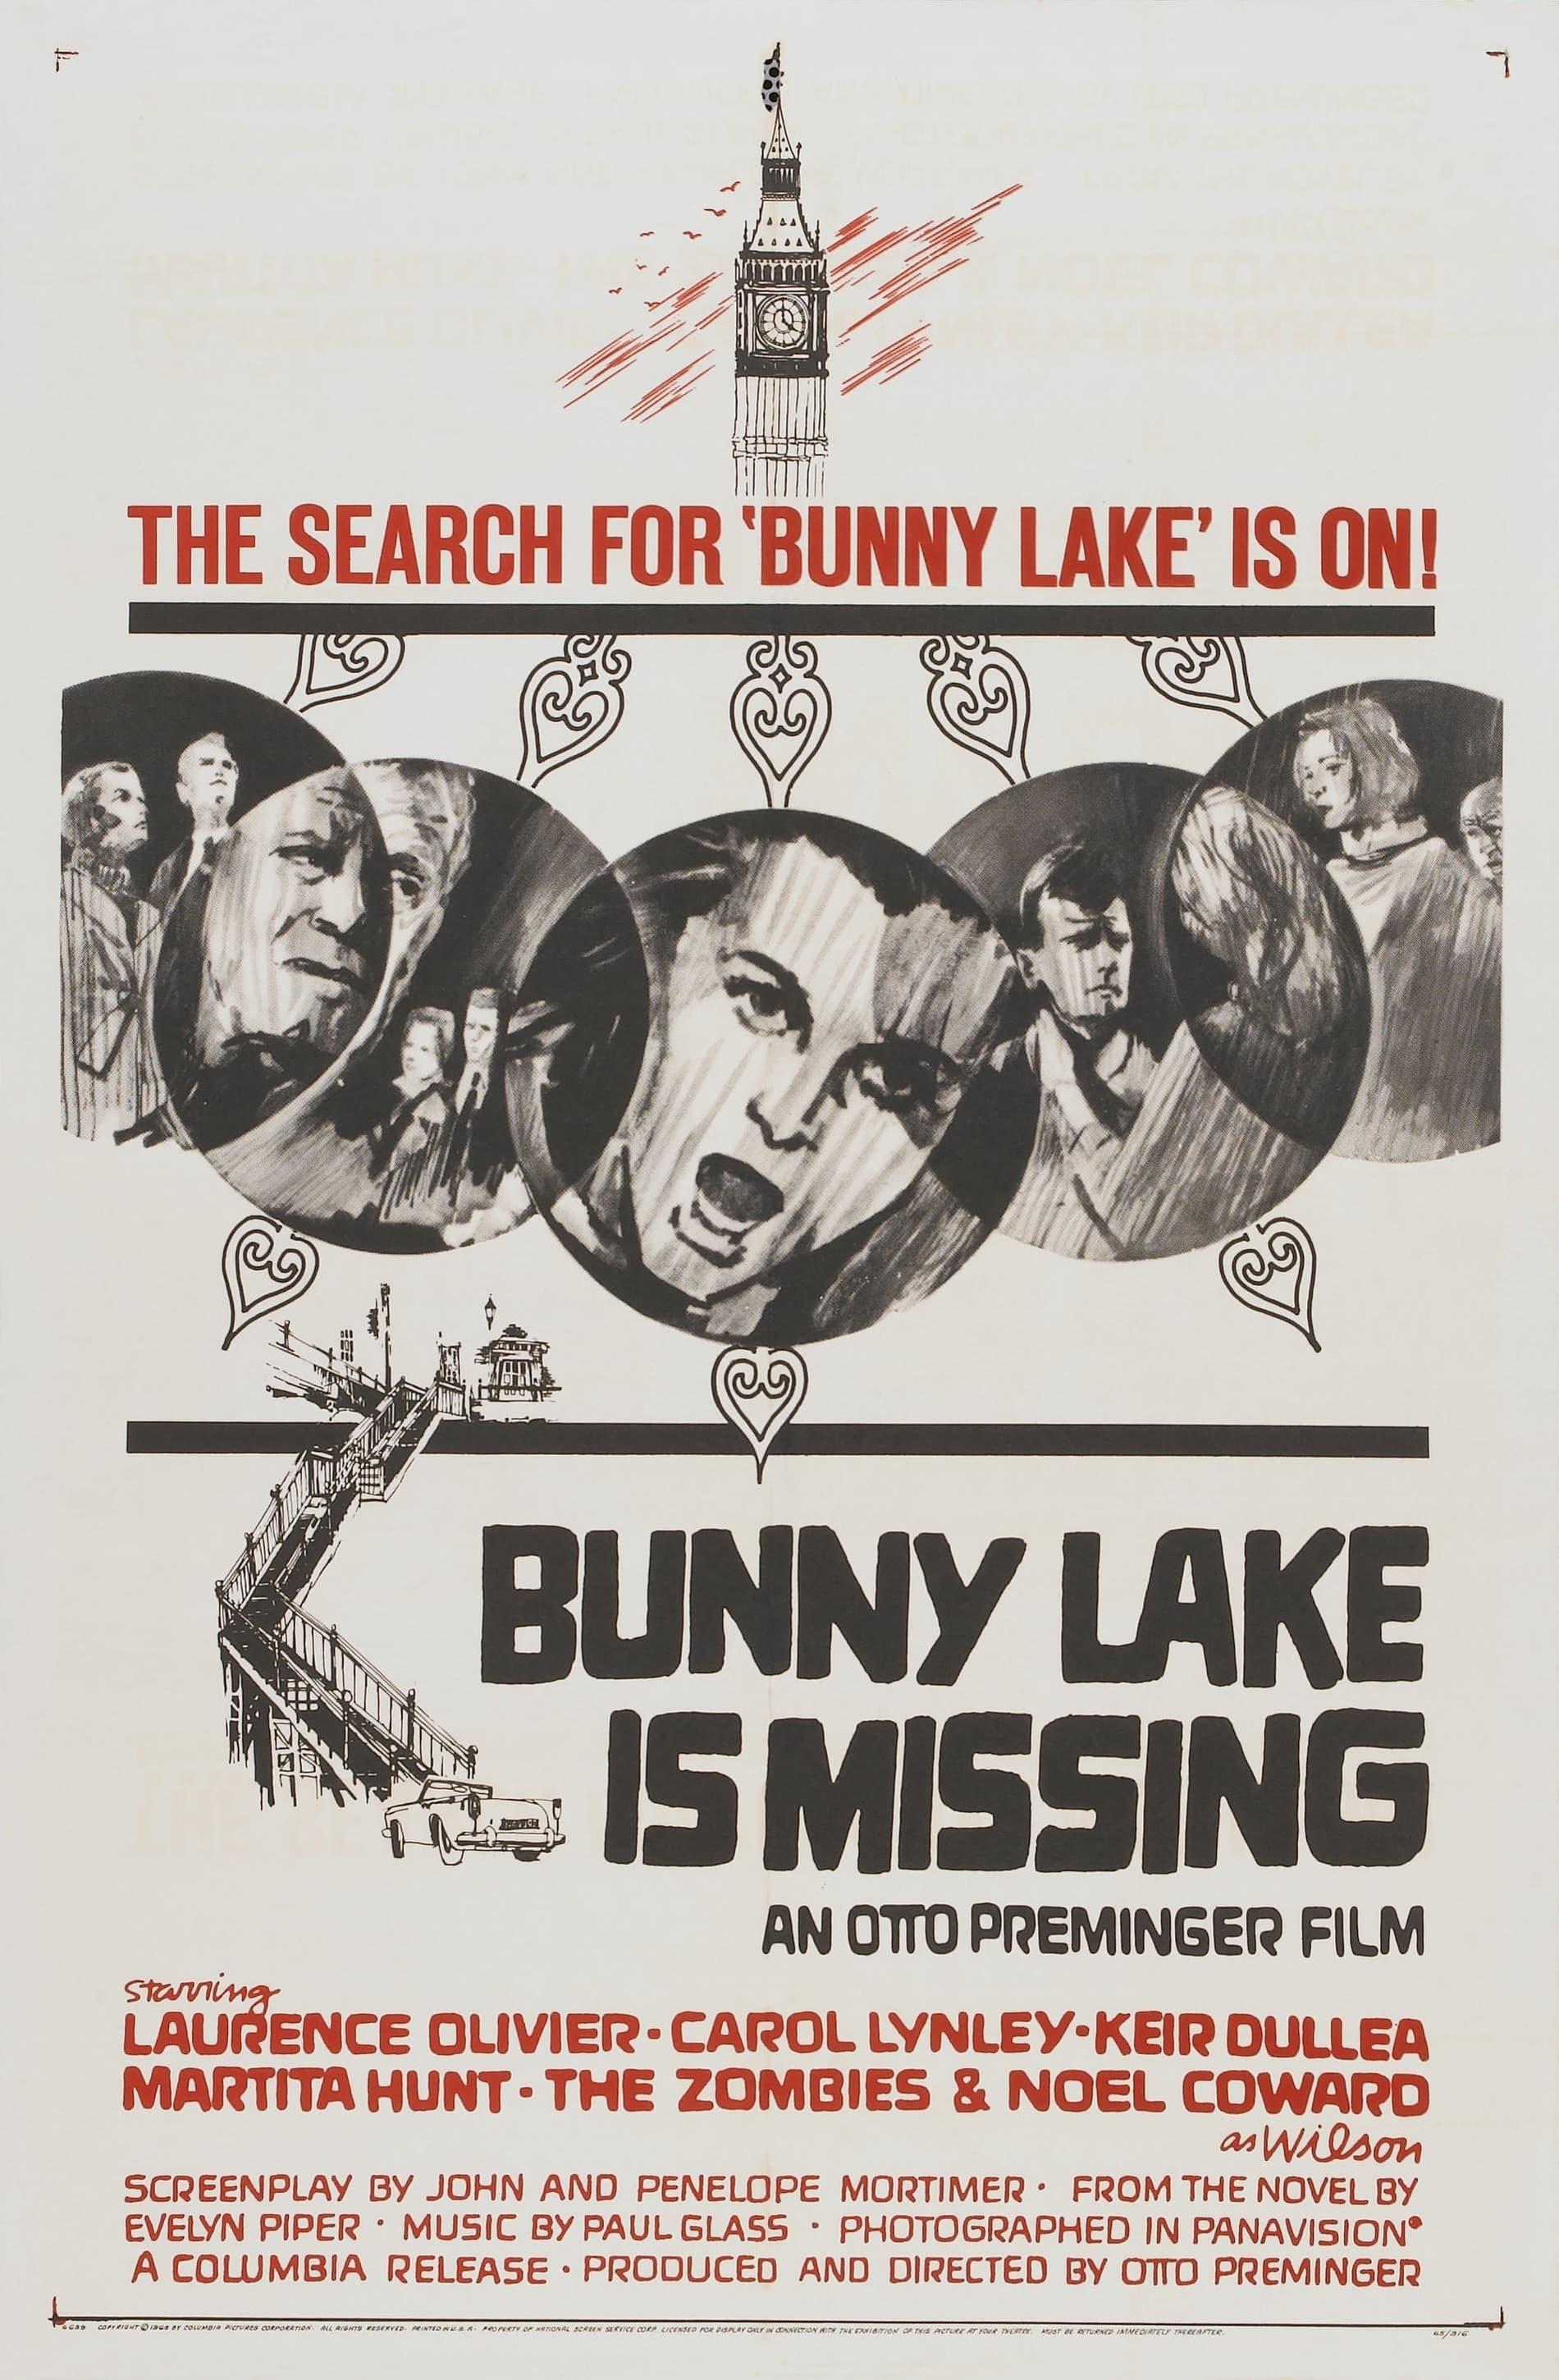 Bunny Lake Is Missing poster